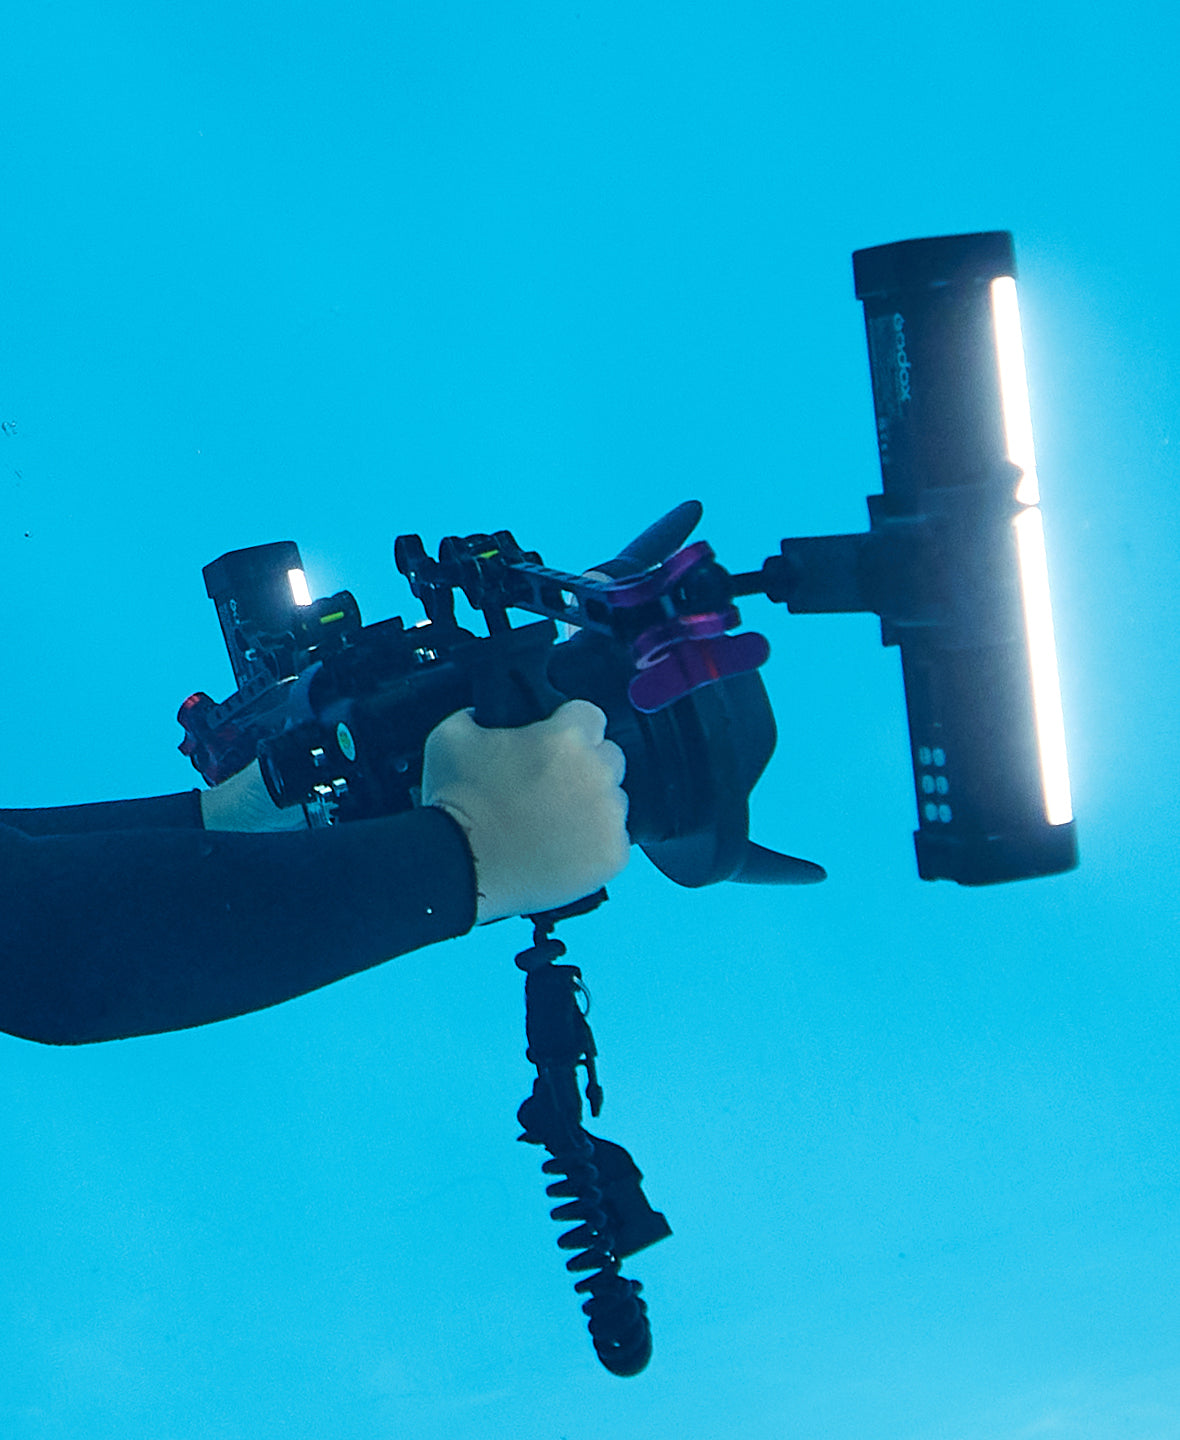 The WT-C01 bracket being used to mount WTD25 LED lights to an underwater lighting rig.